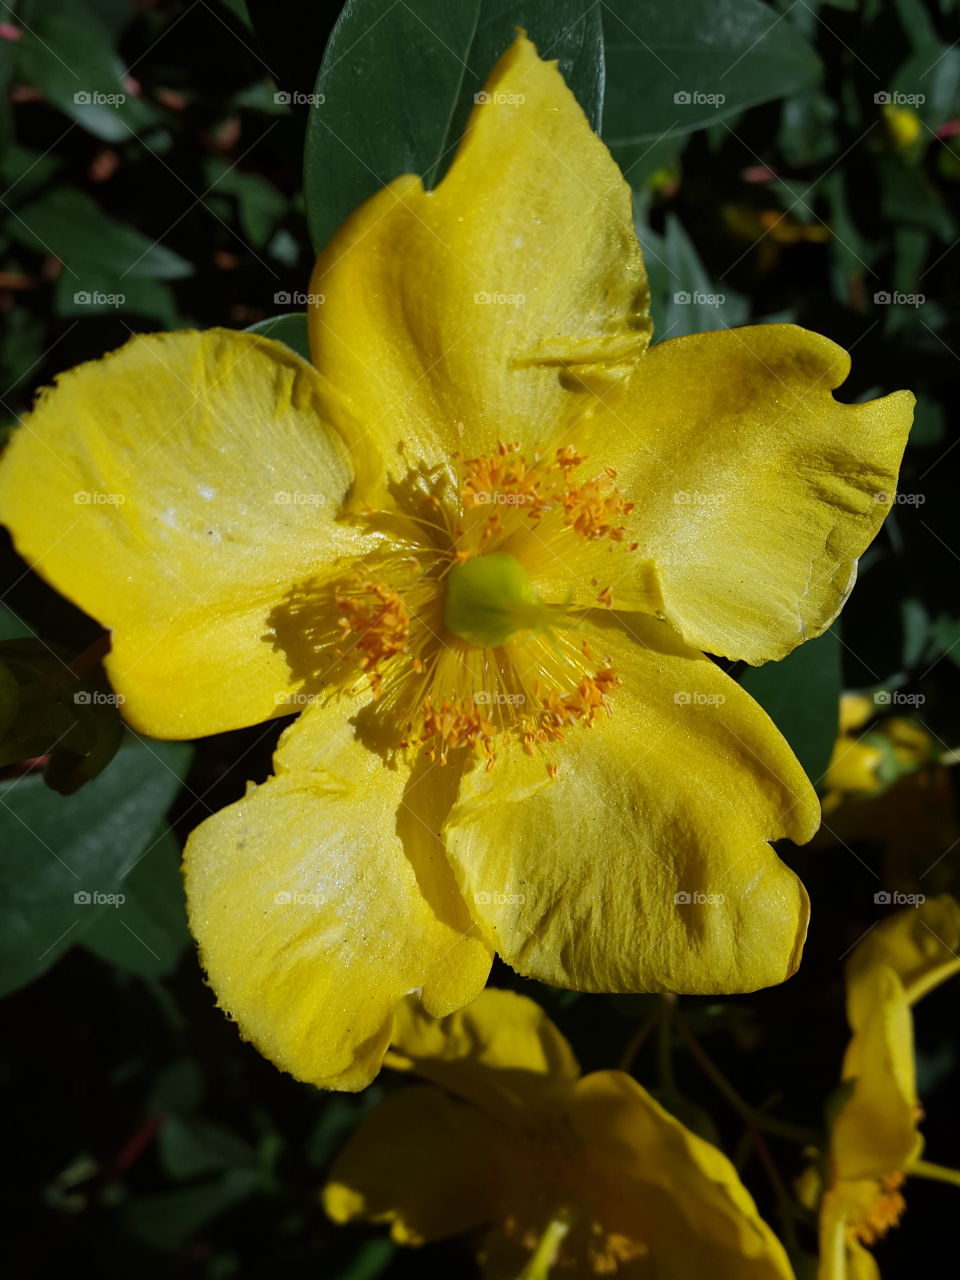 another yellow bloom to brighten the days